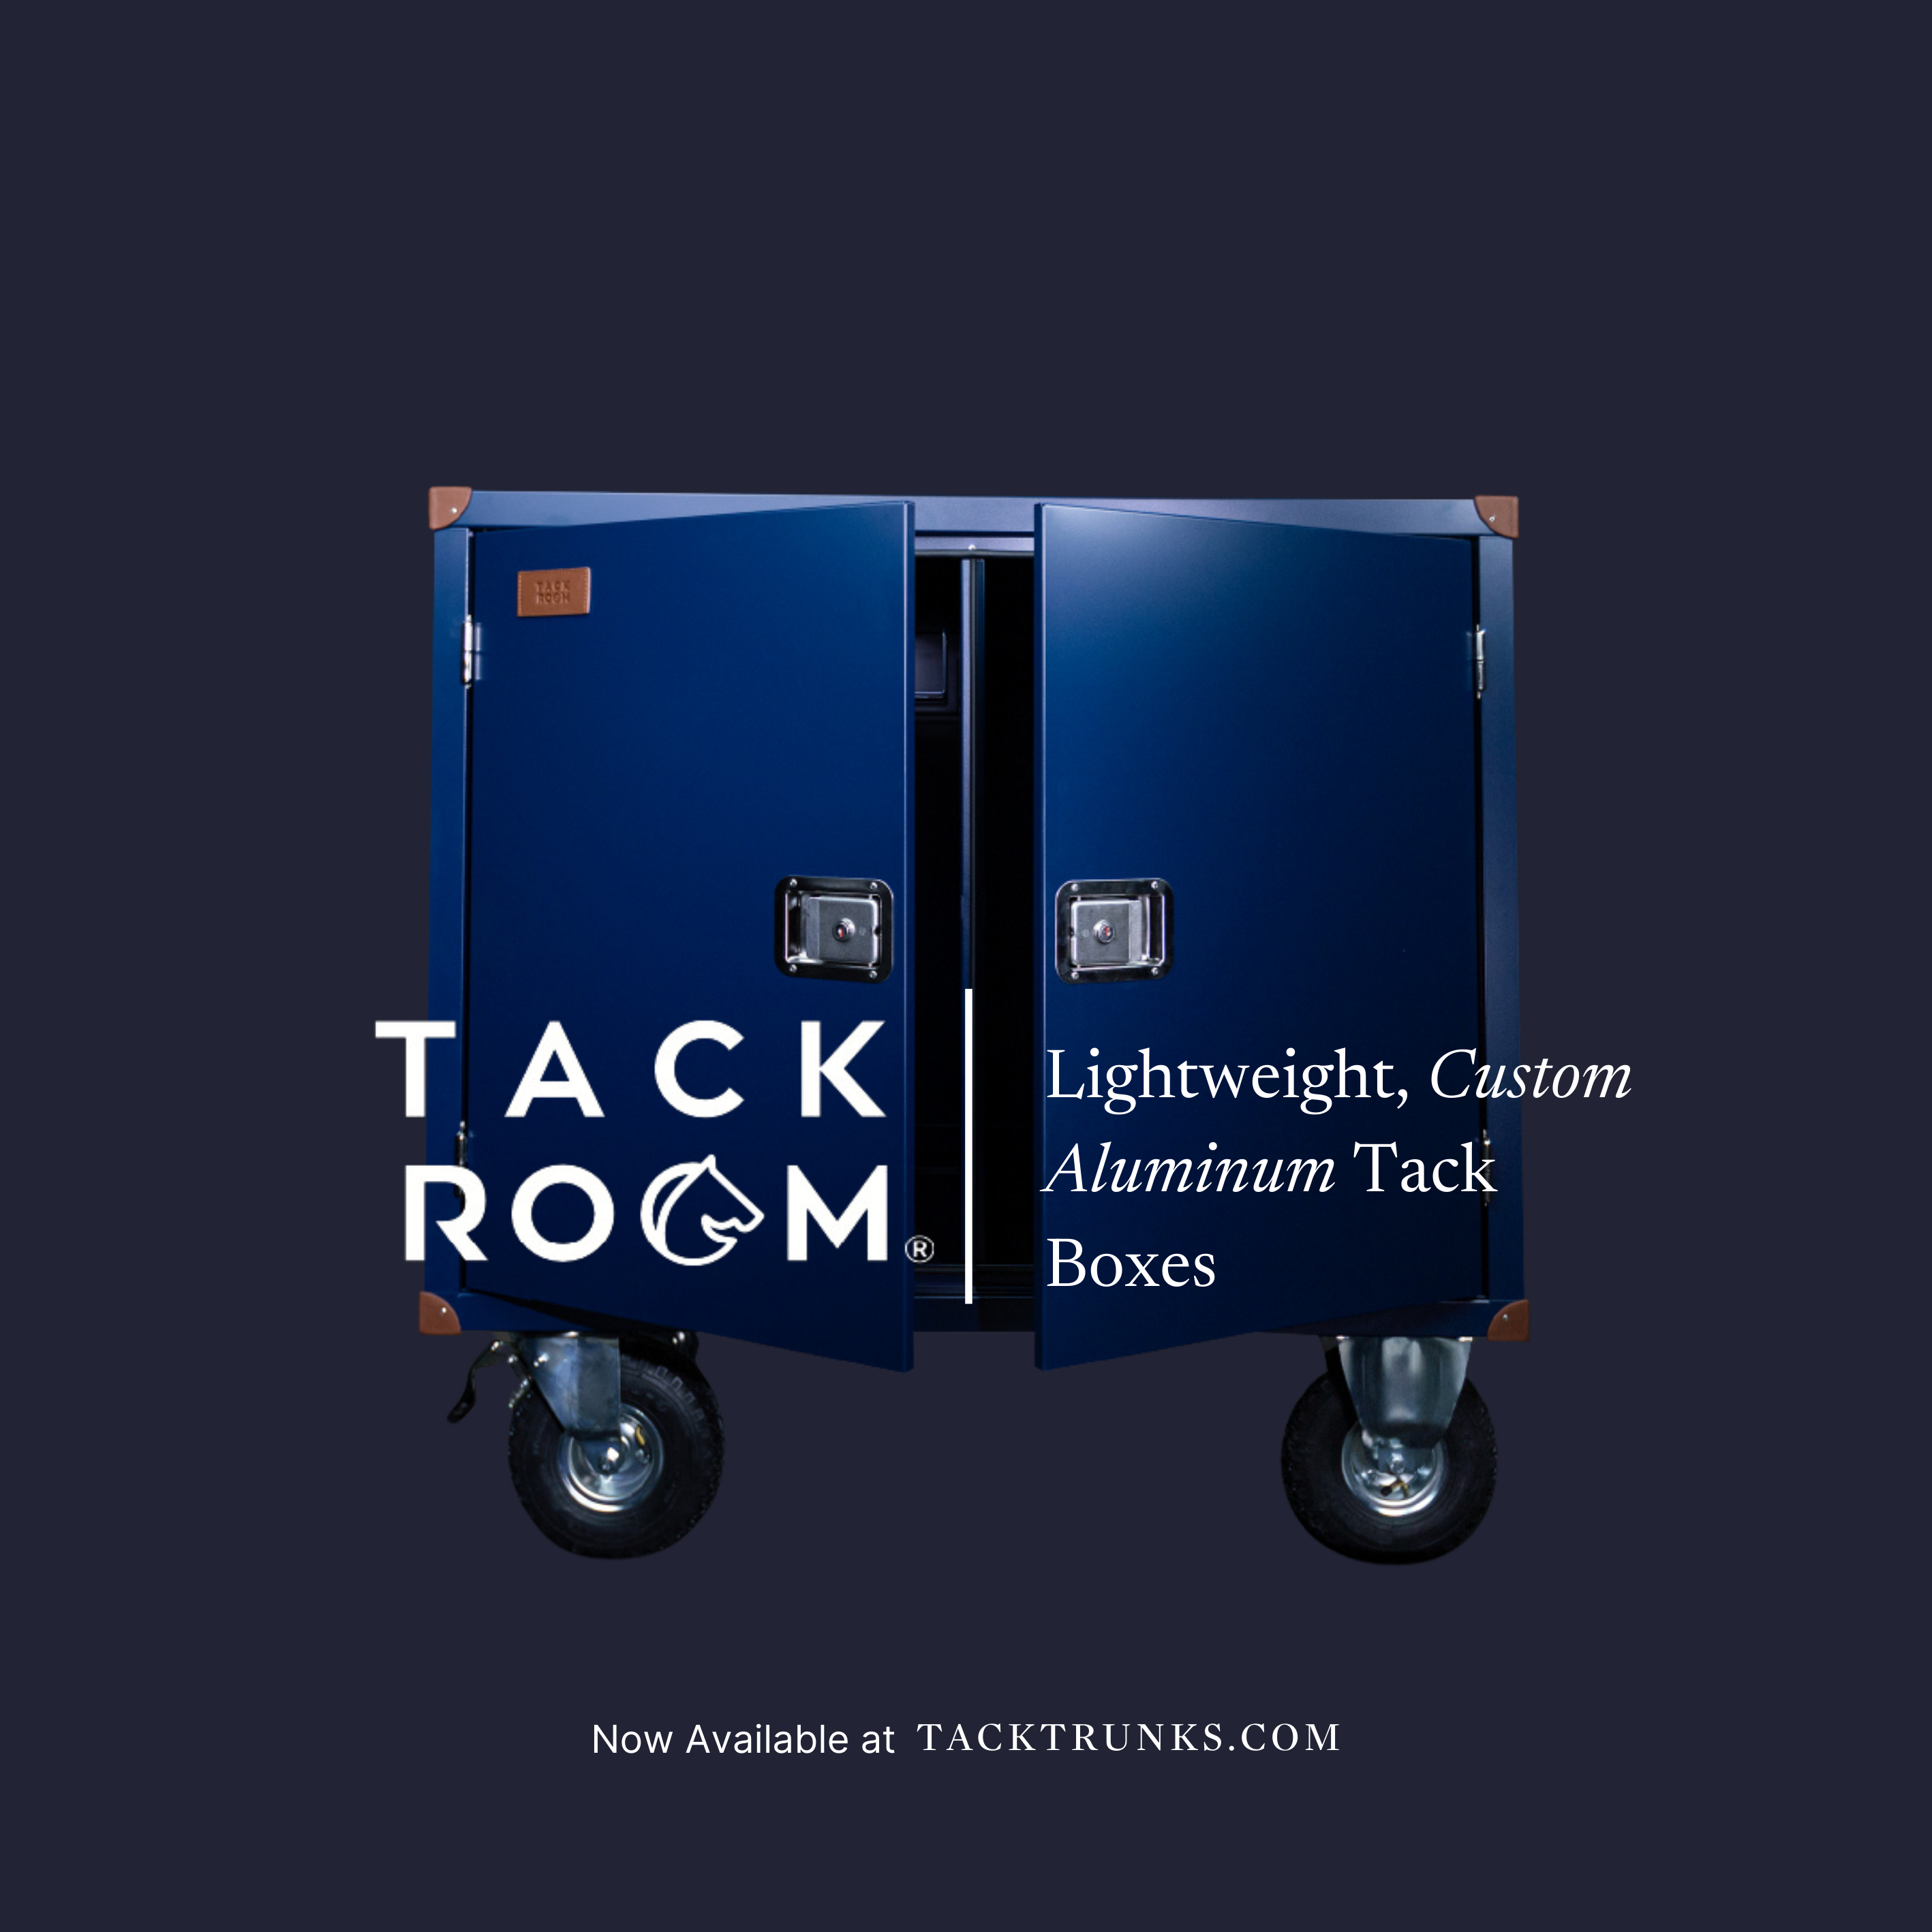 Aluminum Tack Lockers Now Available for Order